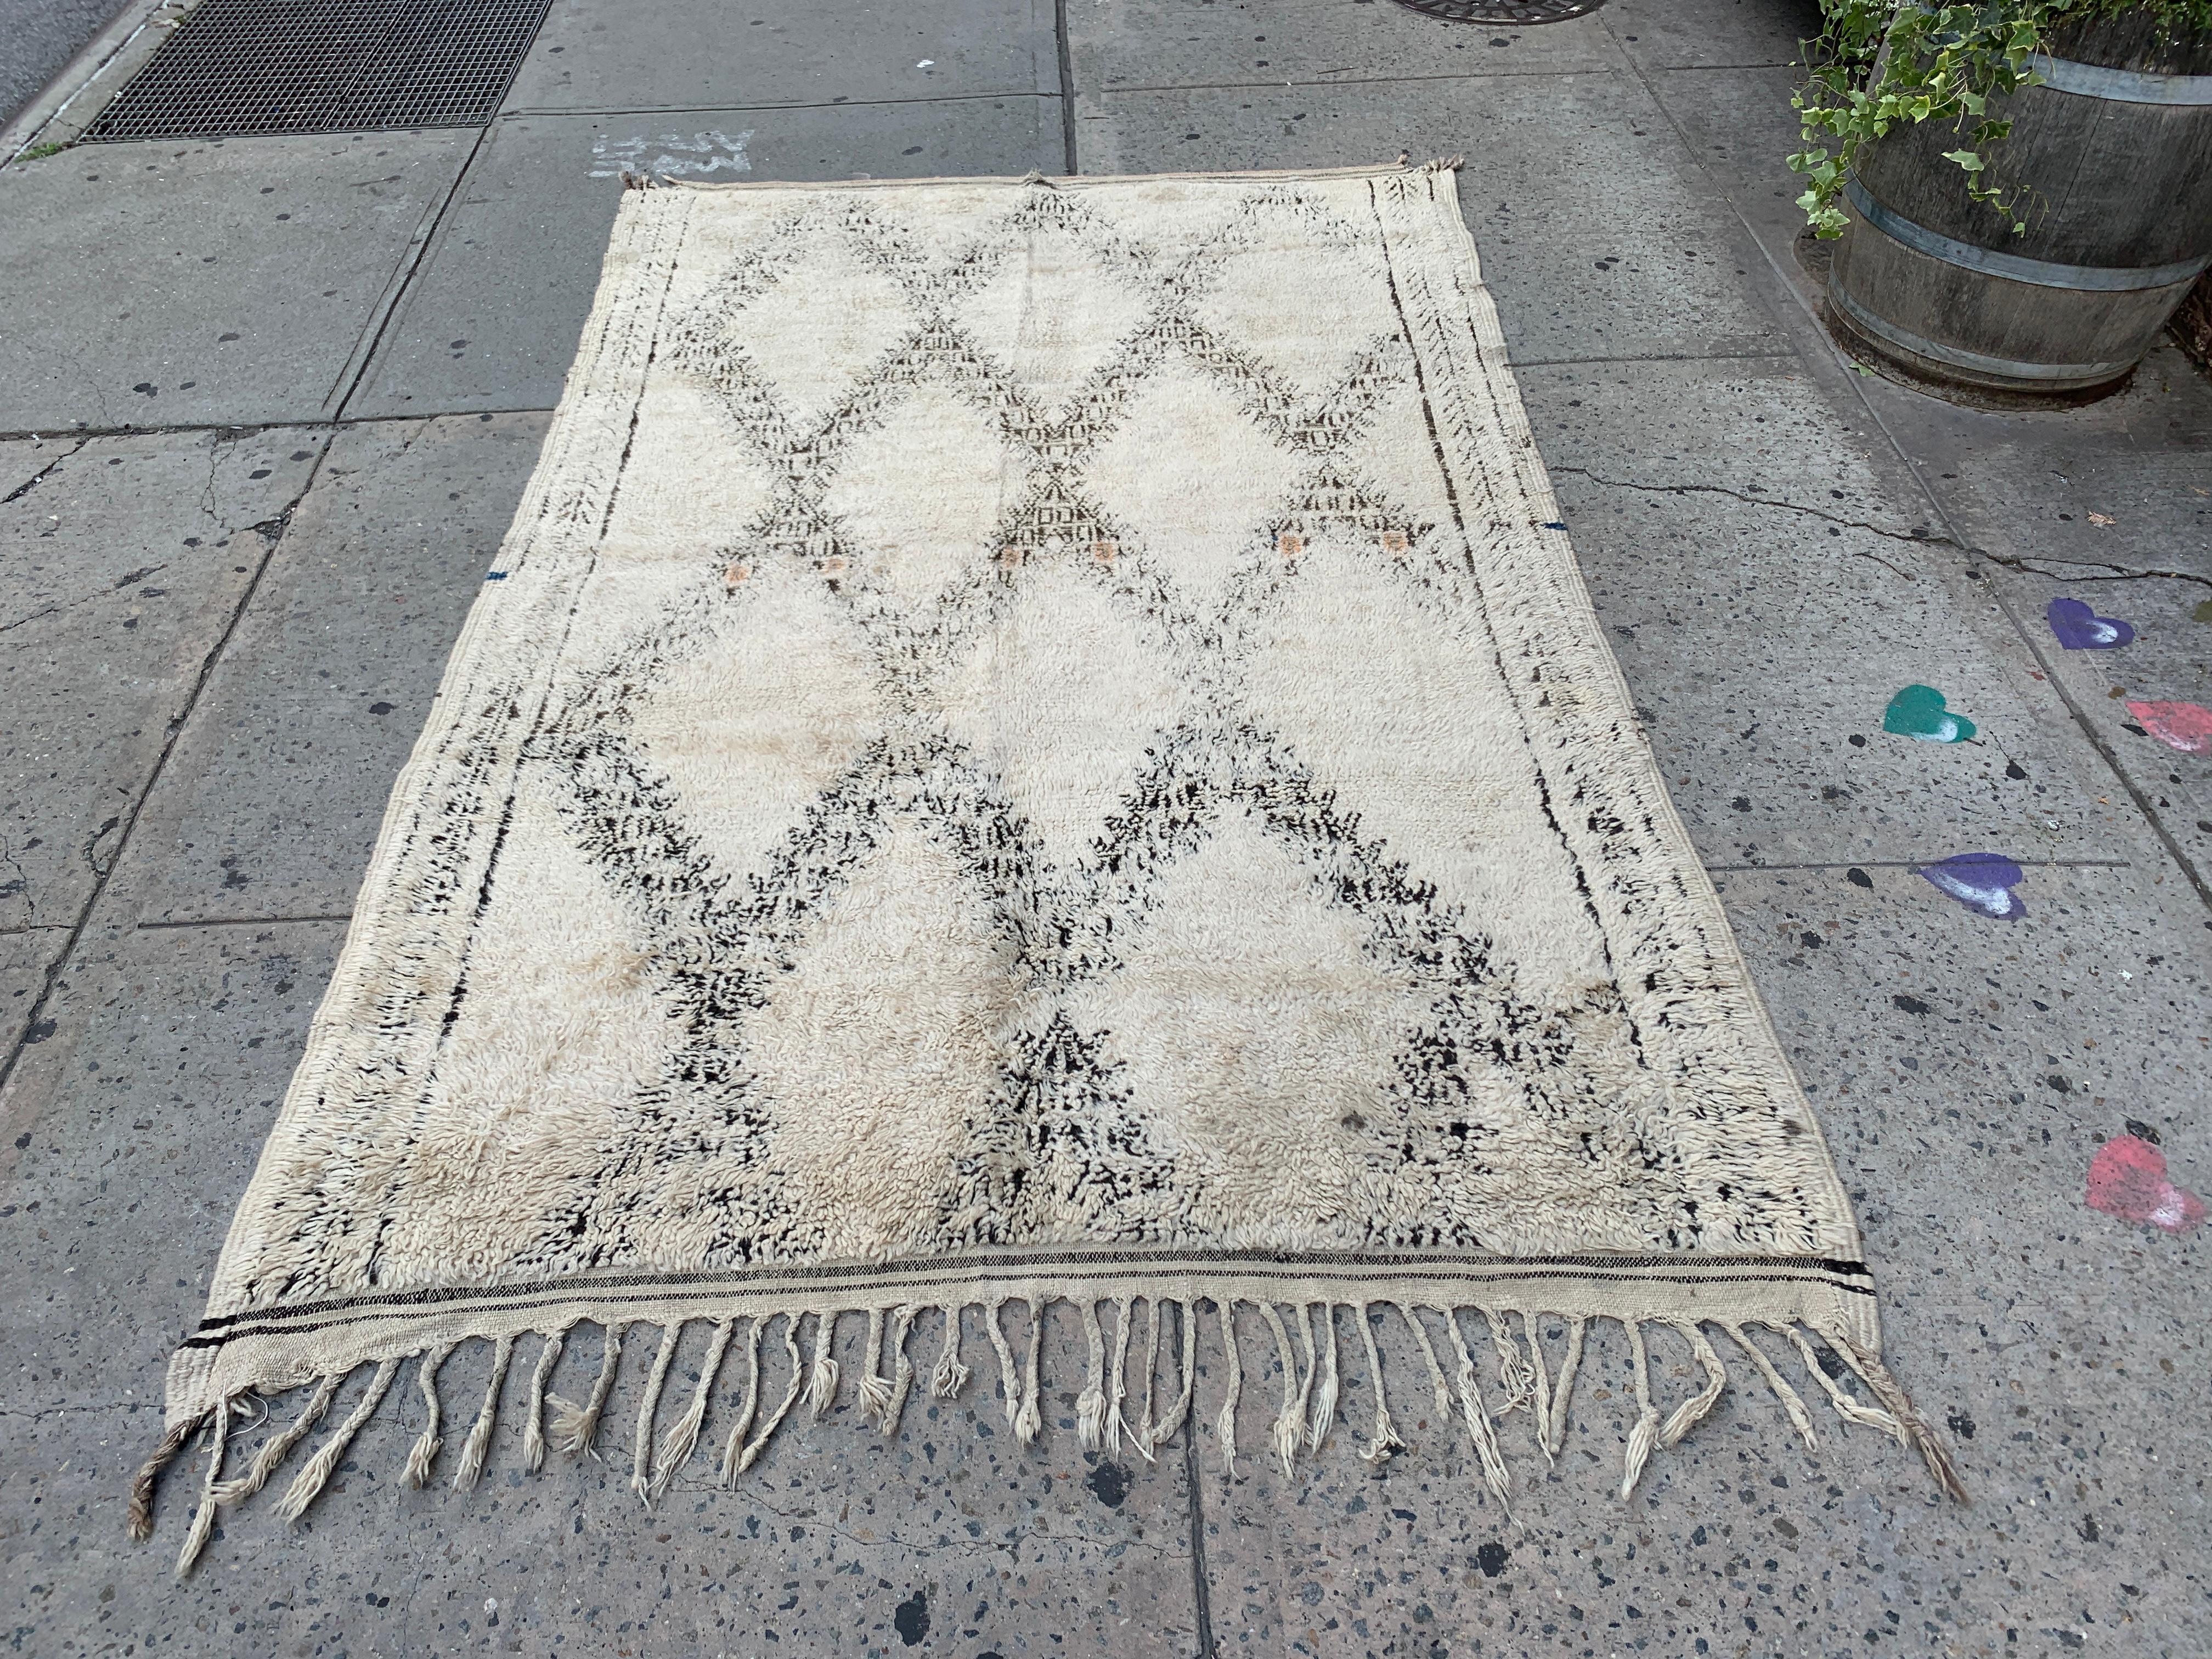 This Vintage handwoven Moroccan Beni rug has a beautiful soft and plush texture. With the rug's diamond pattern this would be a great addition to incorporate graphics in a subtle manner.